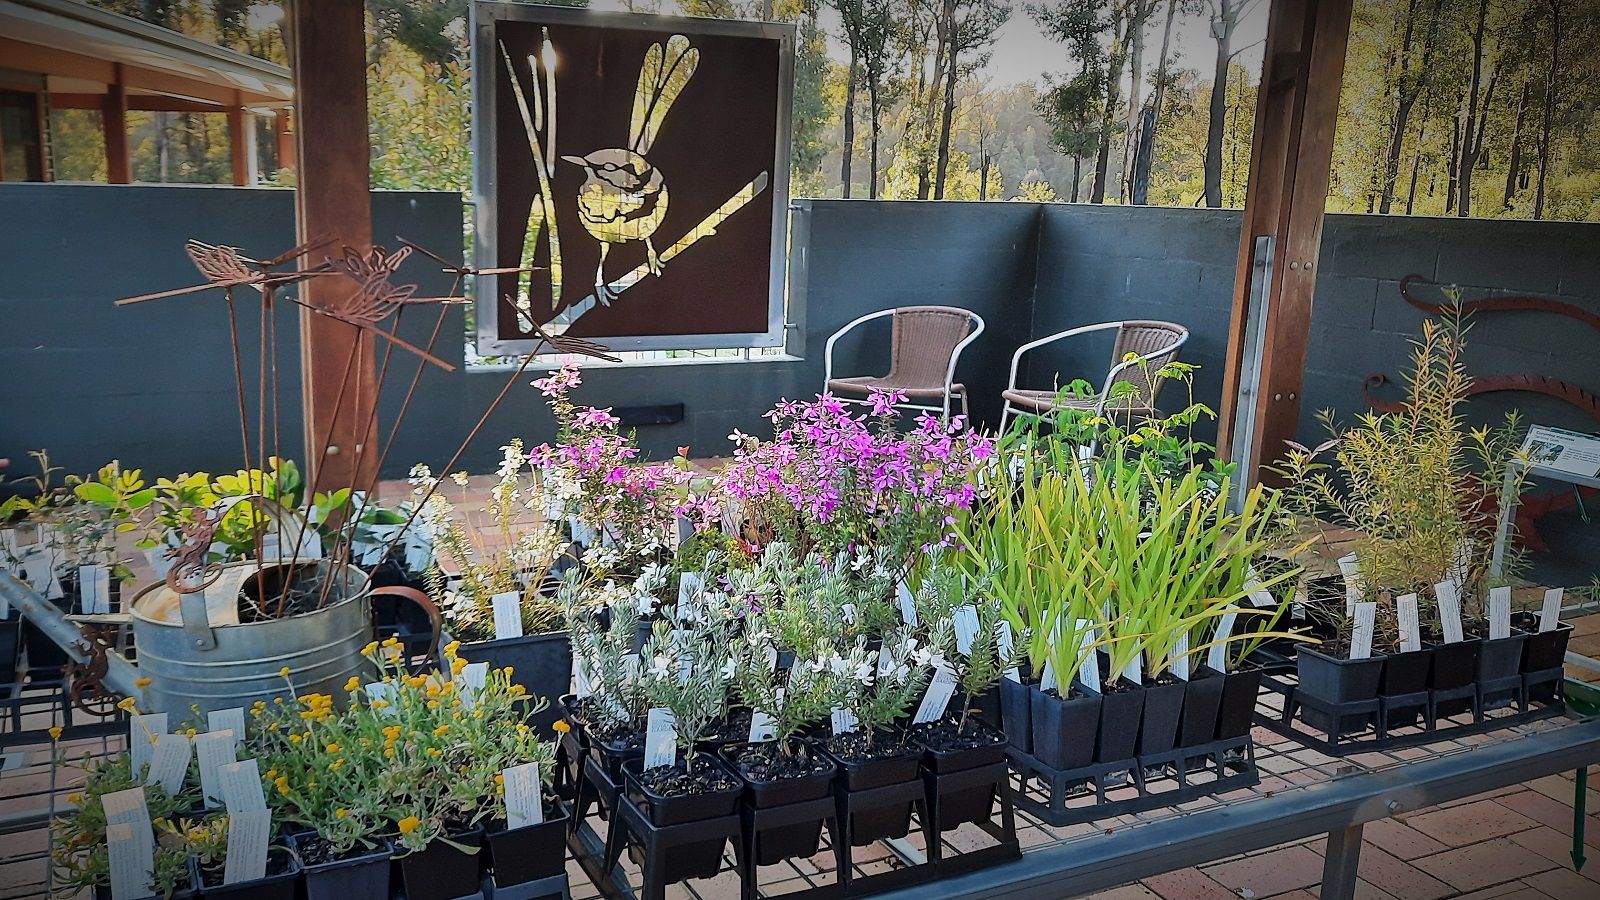 Seedlings available for purchase from the Eurobodalla Botanic Garden shop. banner image